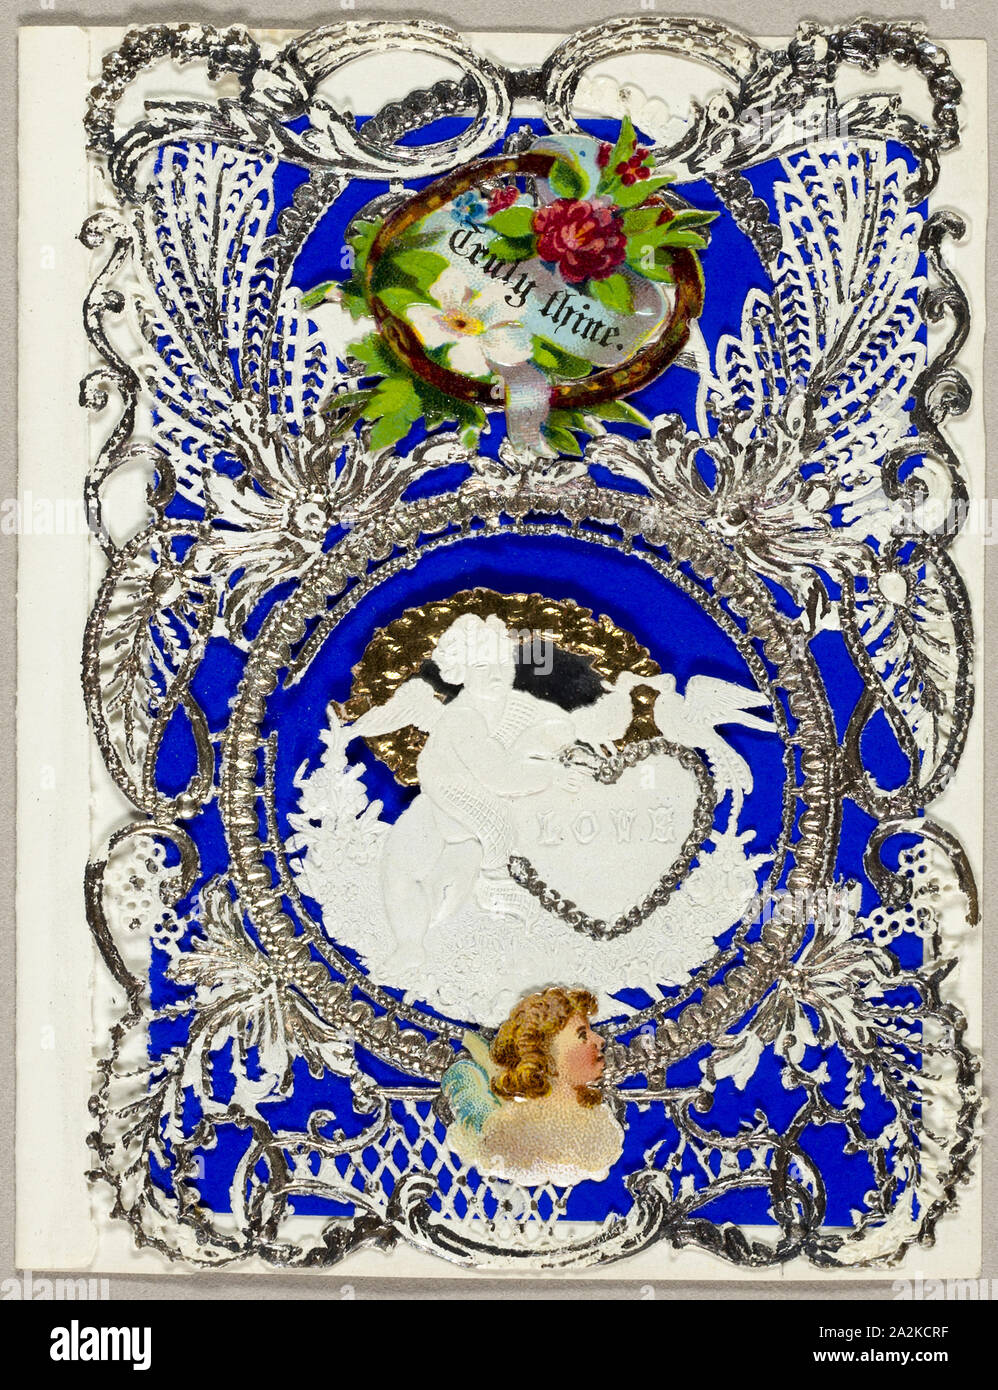 Truly Thine (valentine), c. 1860, John Windsor, English, 19th century, England, Collaged elements and silver paint on cut and embossed (designed) ivory wove paper with blue wove paper insert, 93 × 72 mm (folded sheet Stock Photo